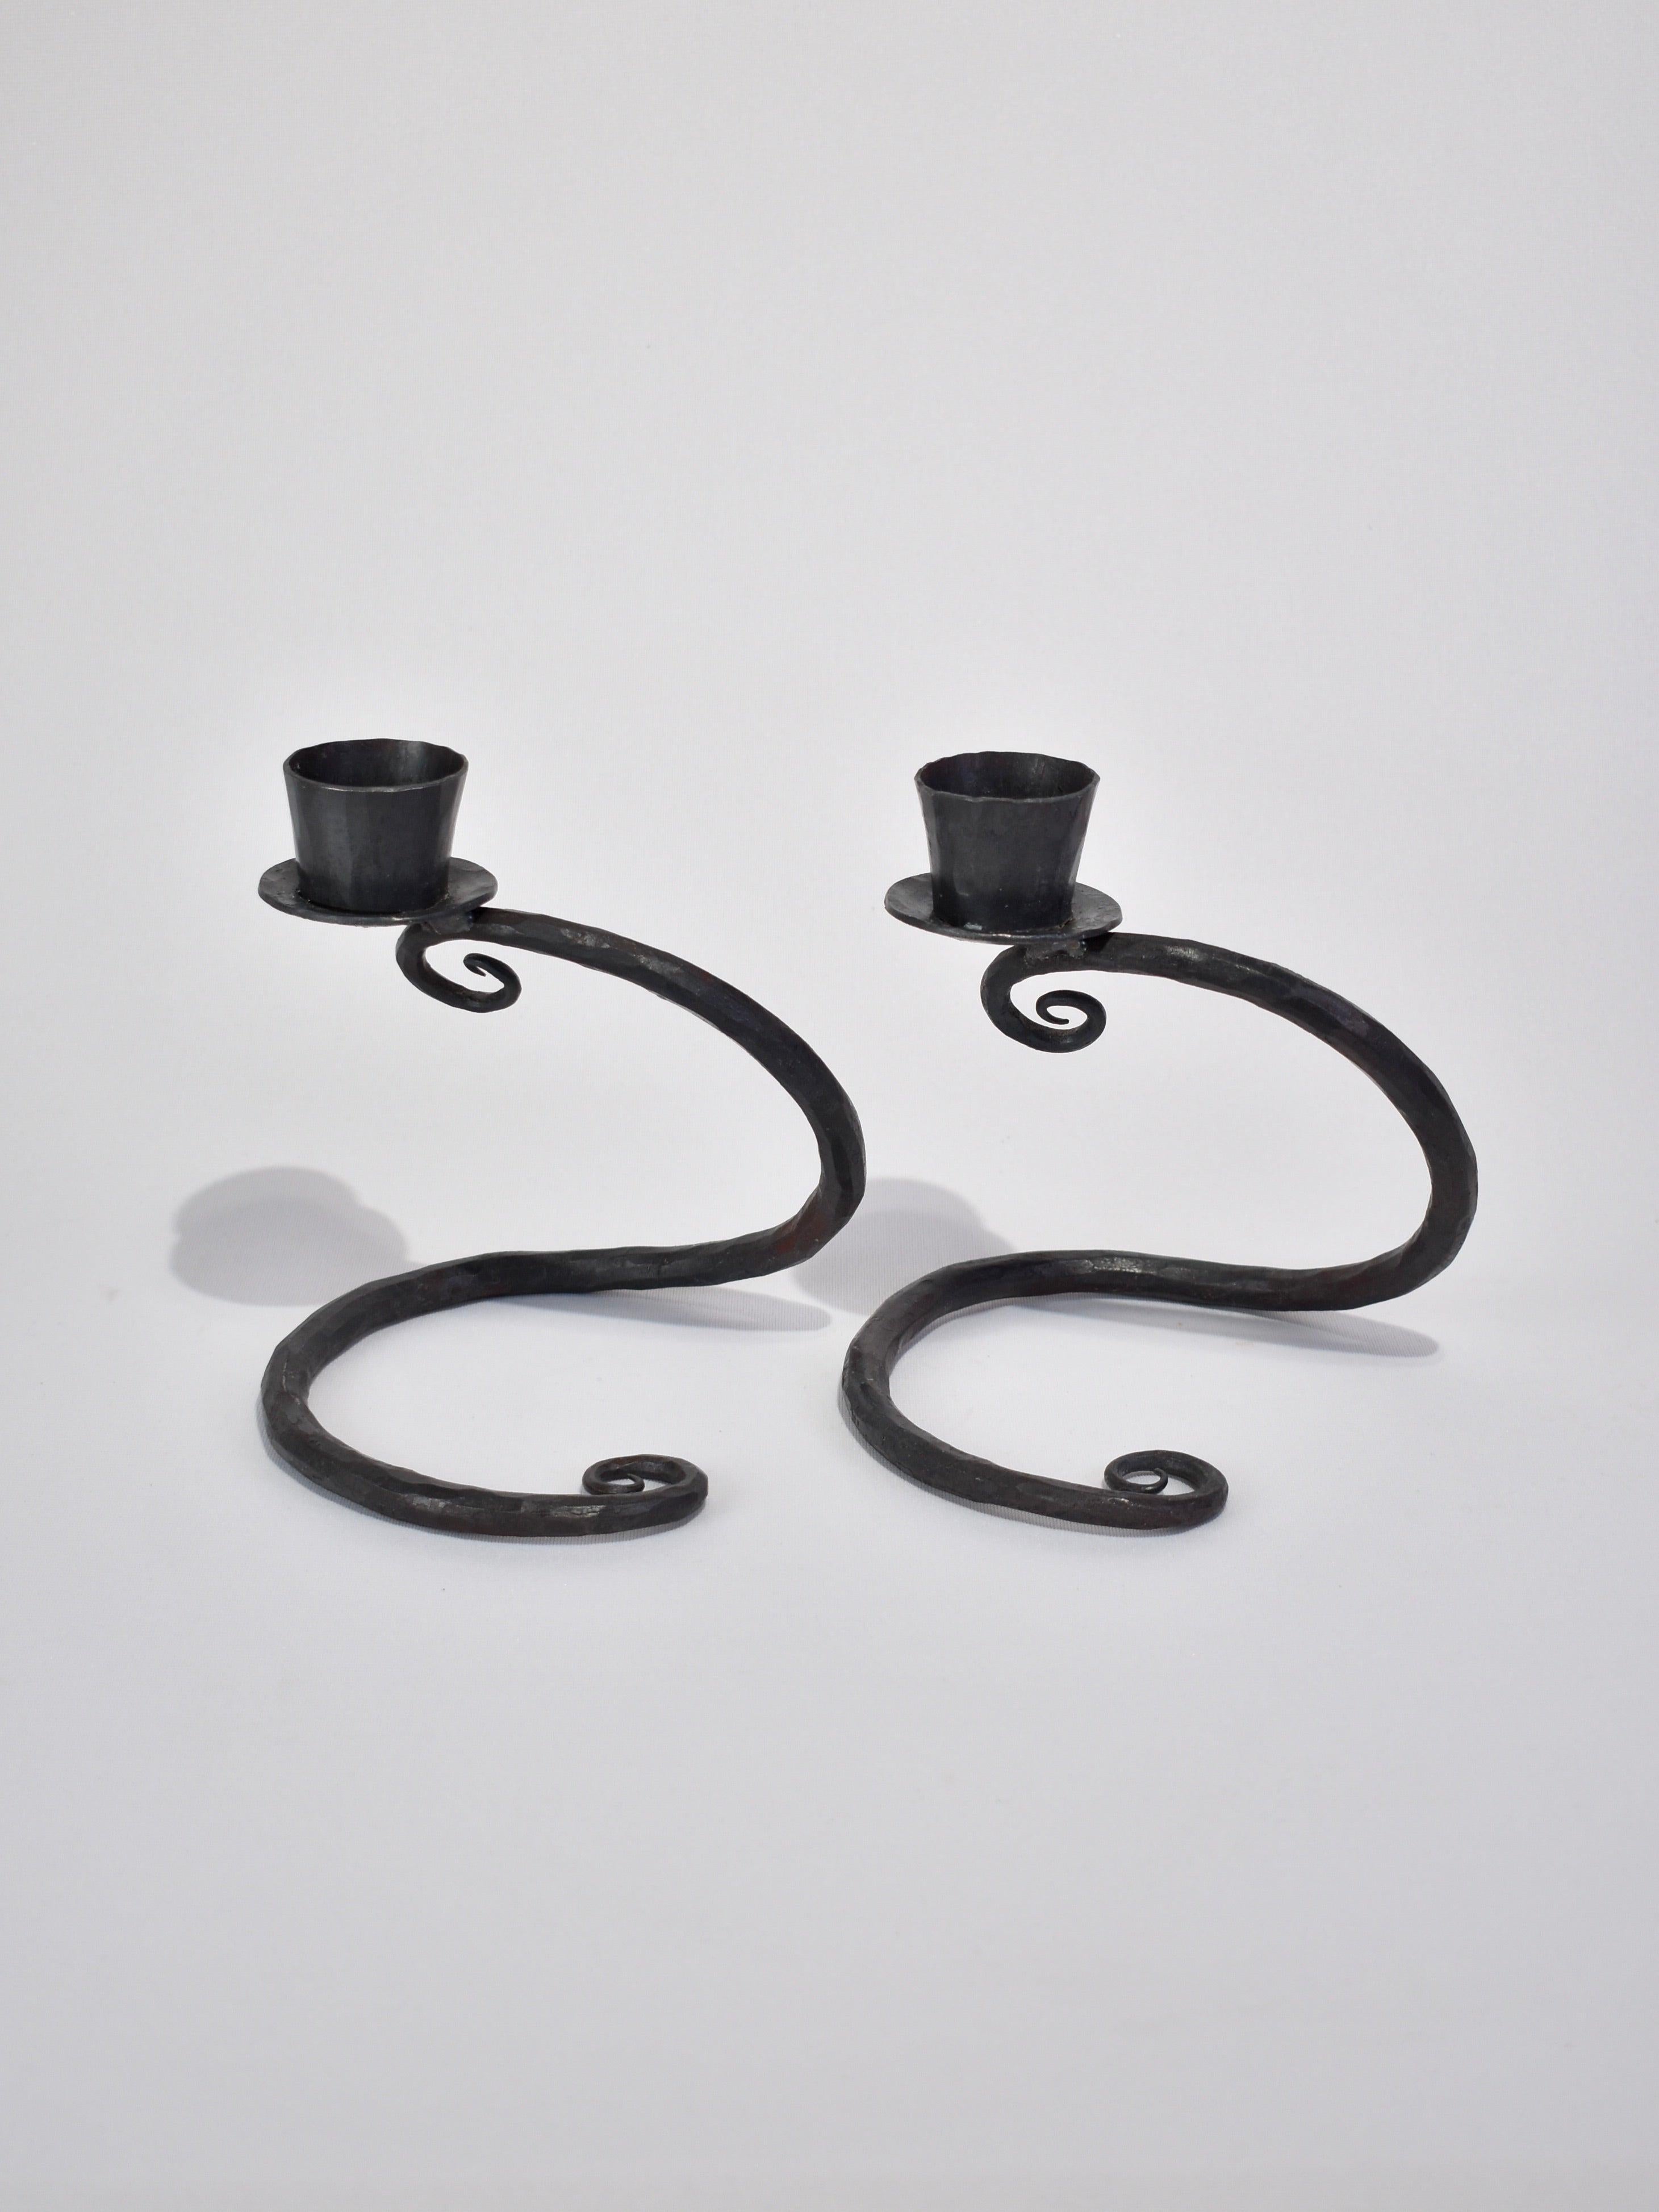 Hand-forged vintage iron candleholders with spiral detail, set of two.